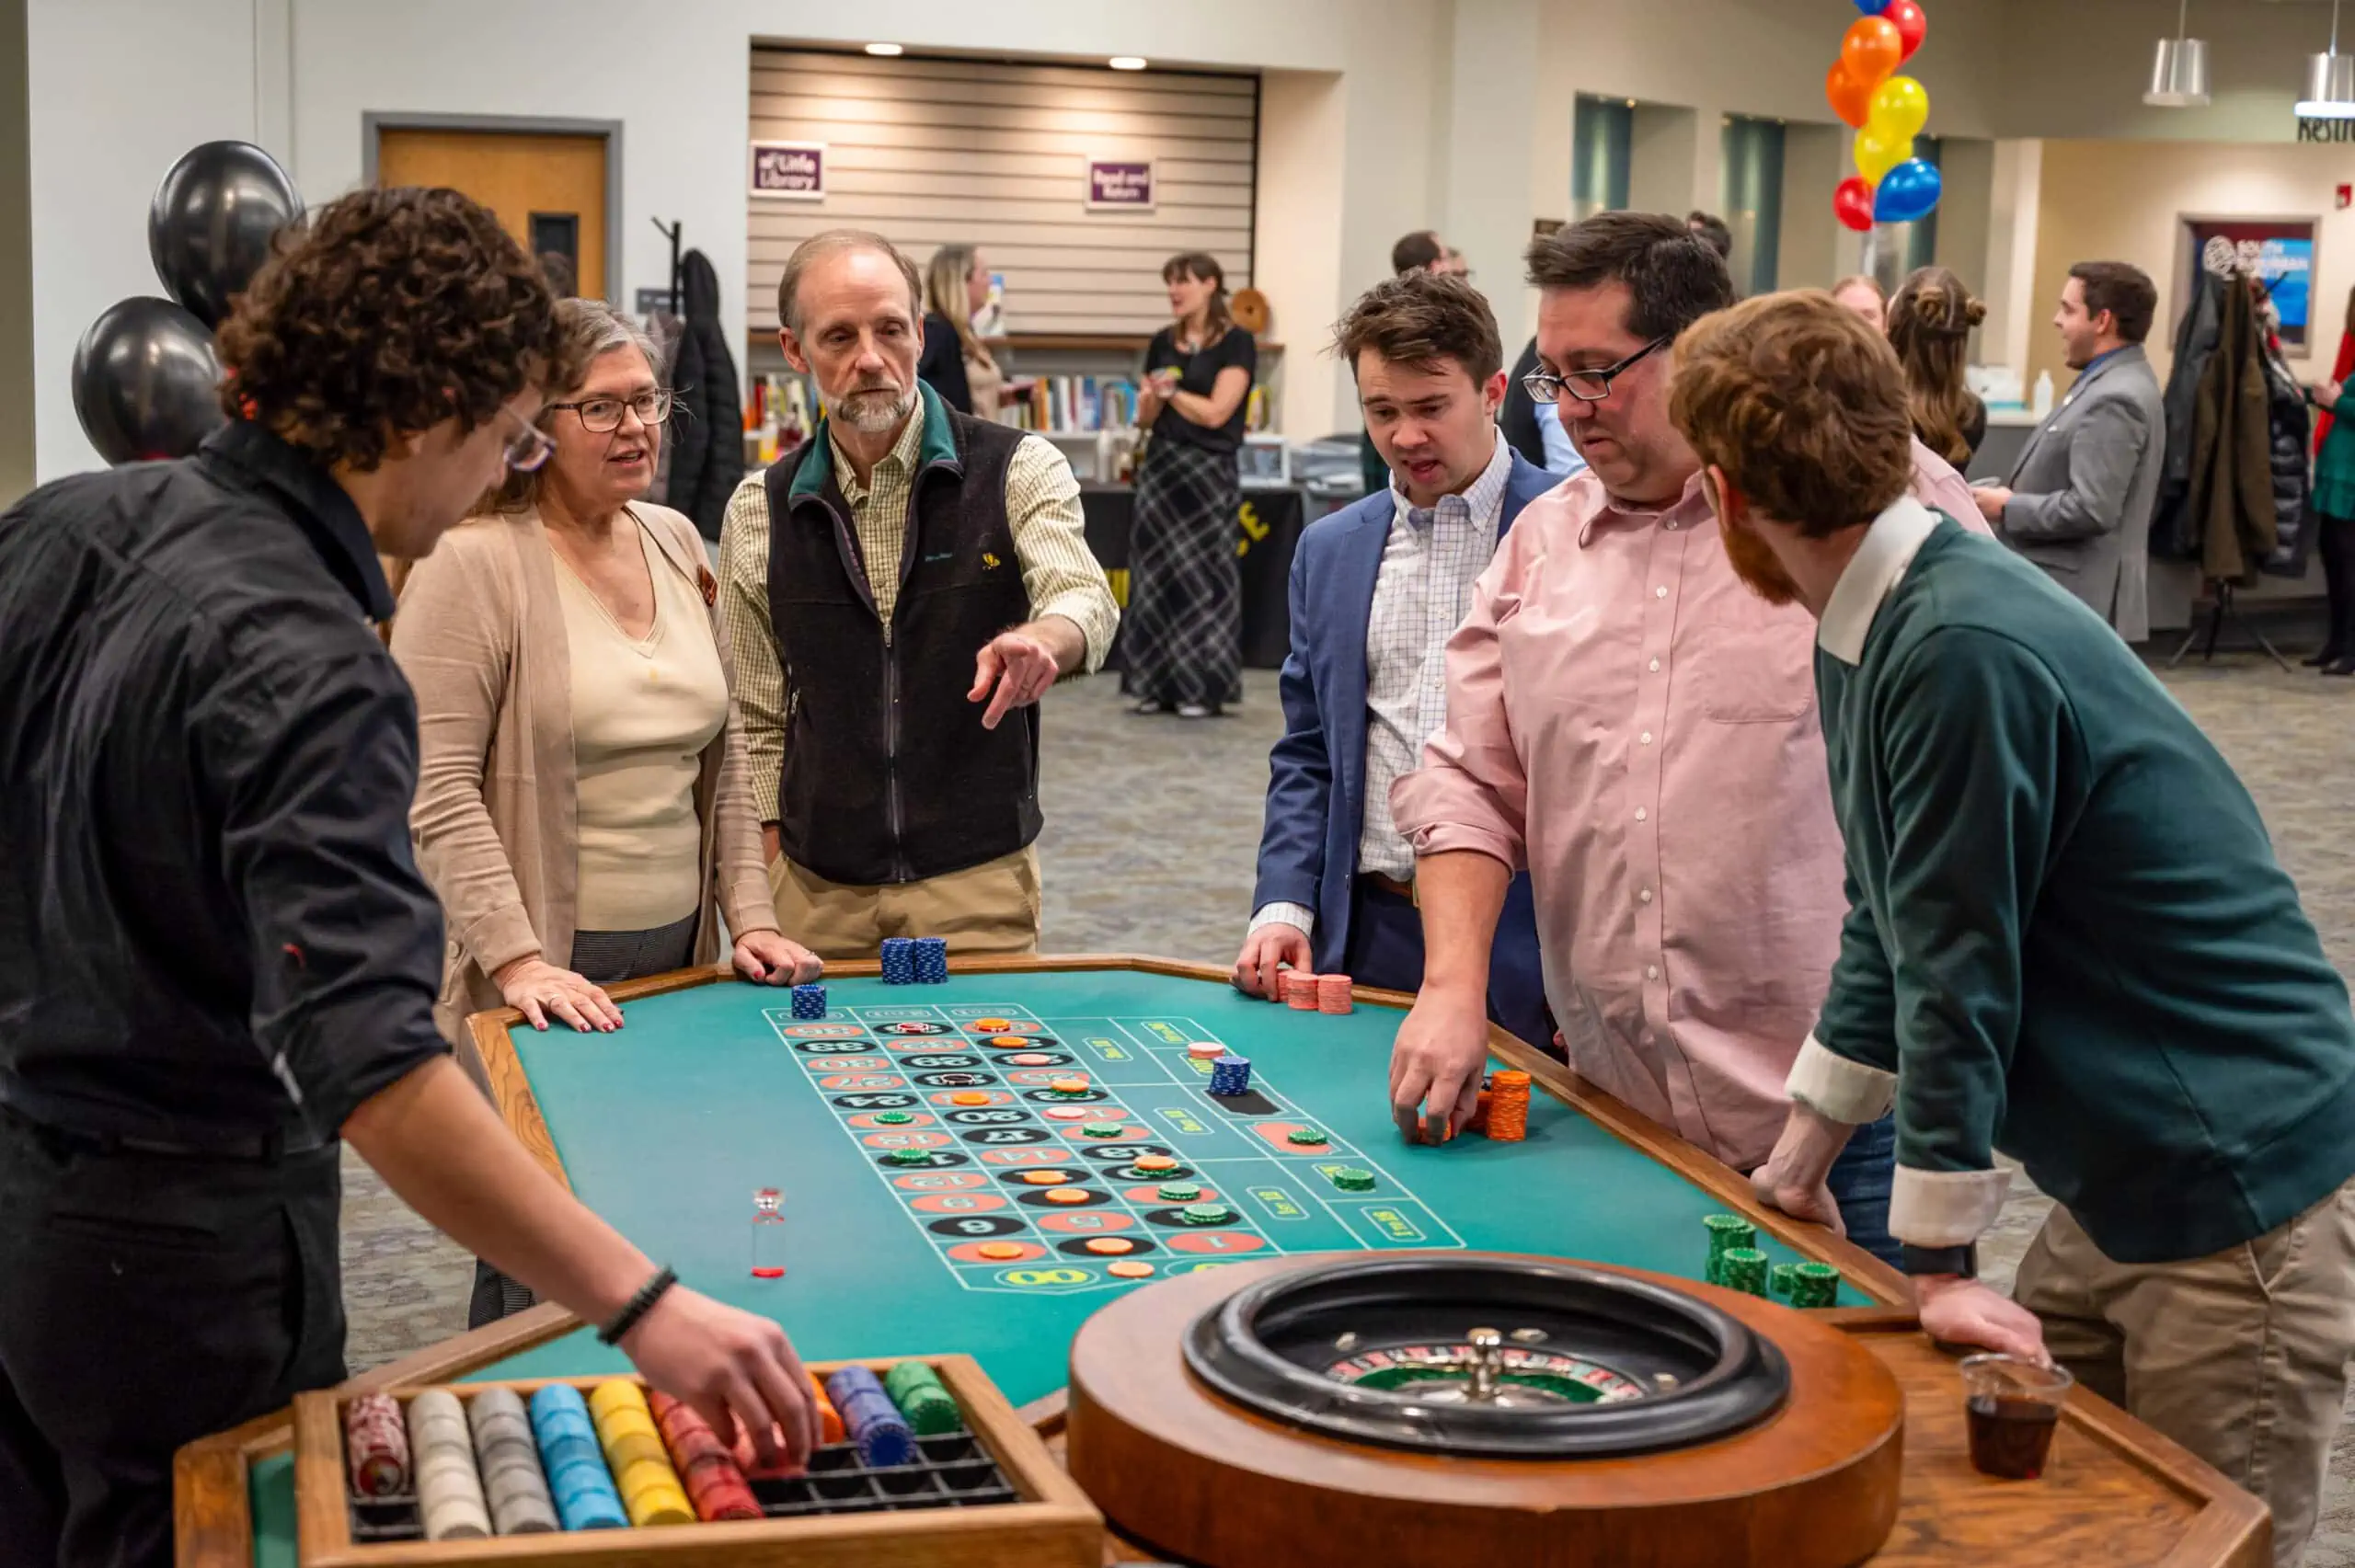 A group of people playing roulette at a K3 event.